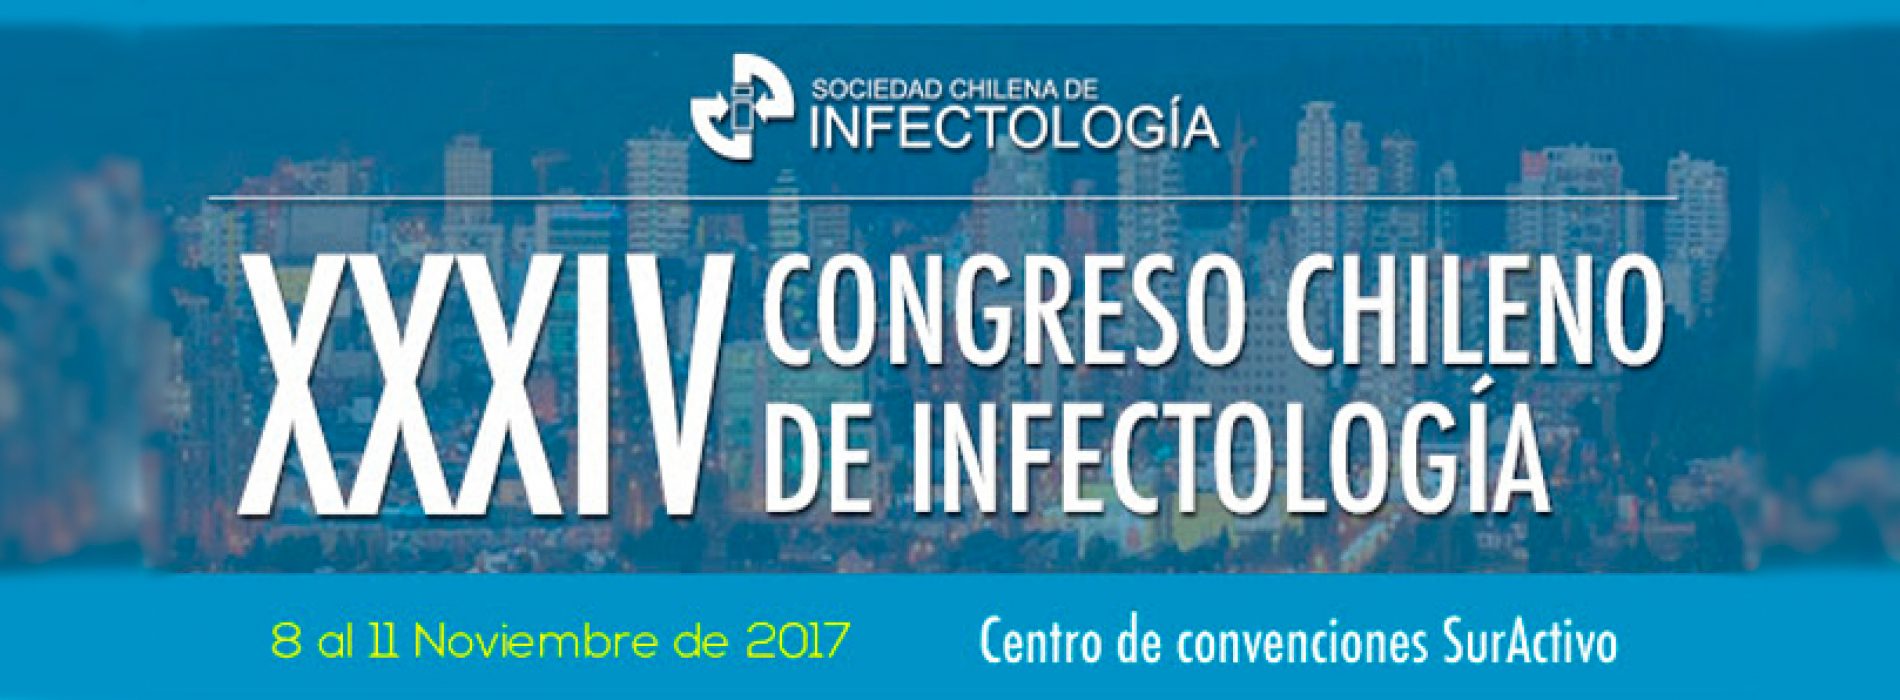 Invitation XXXIV Congress Chilean of infectious diseases